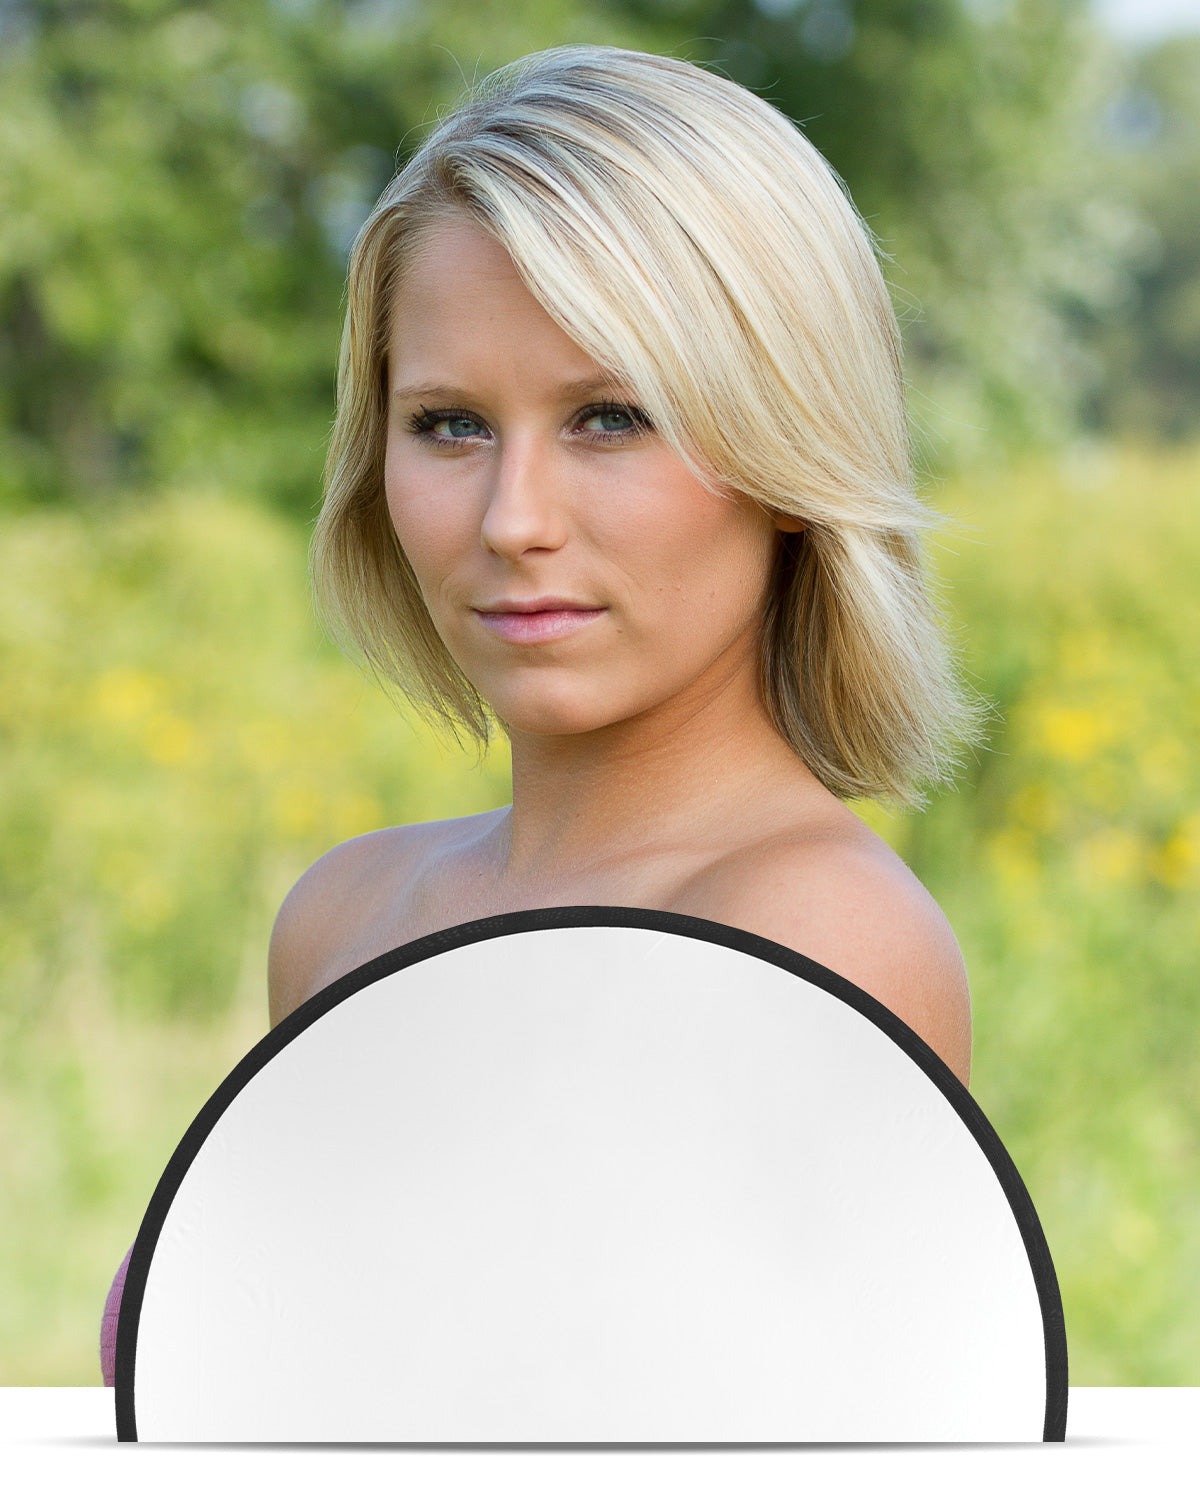 Outdoor Portrait Using Diffusion Round Reflector